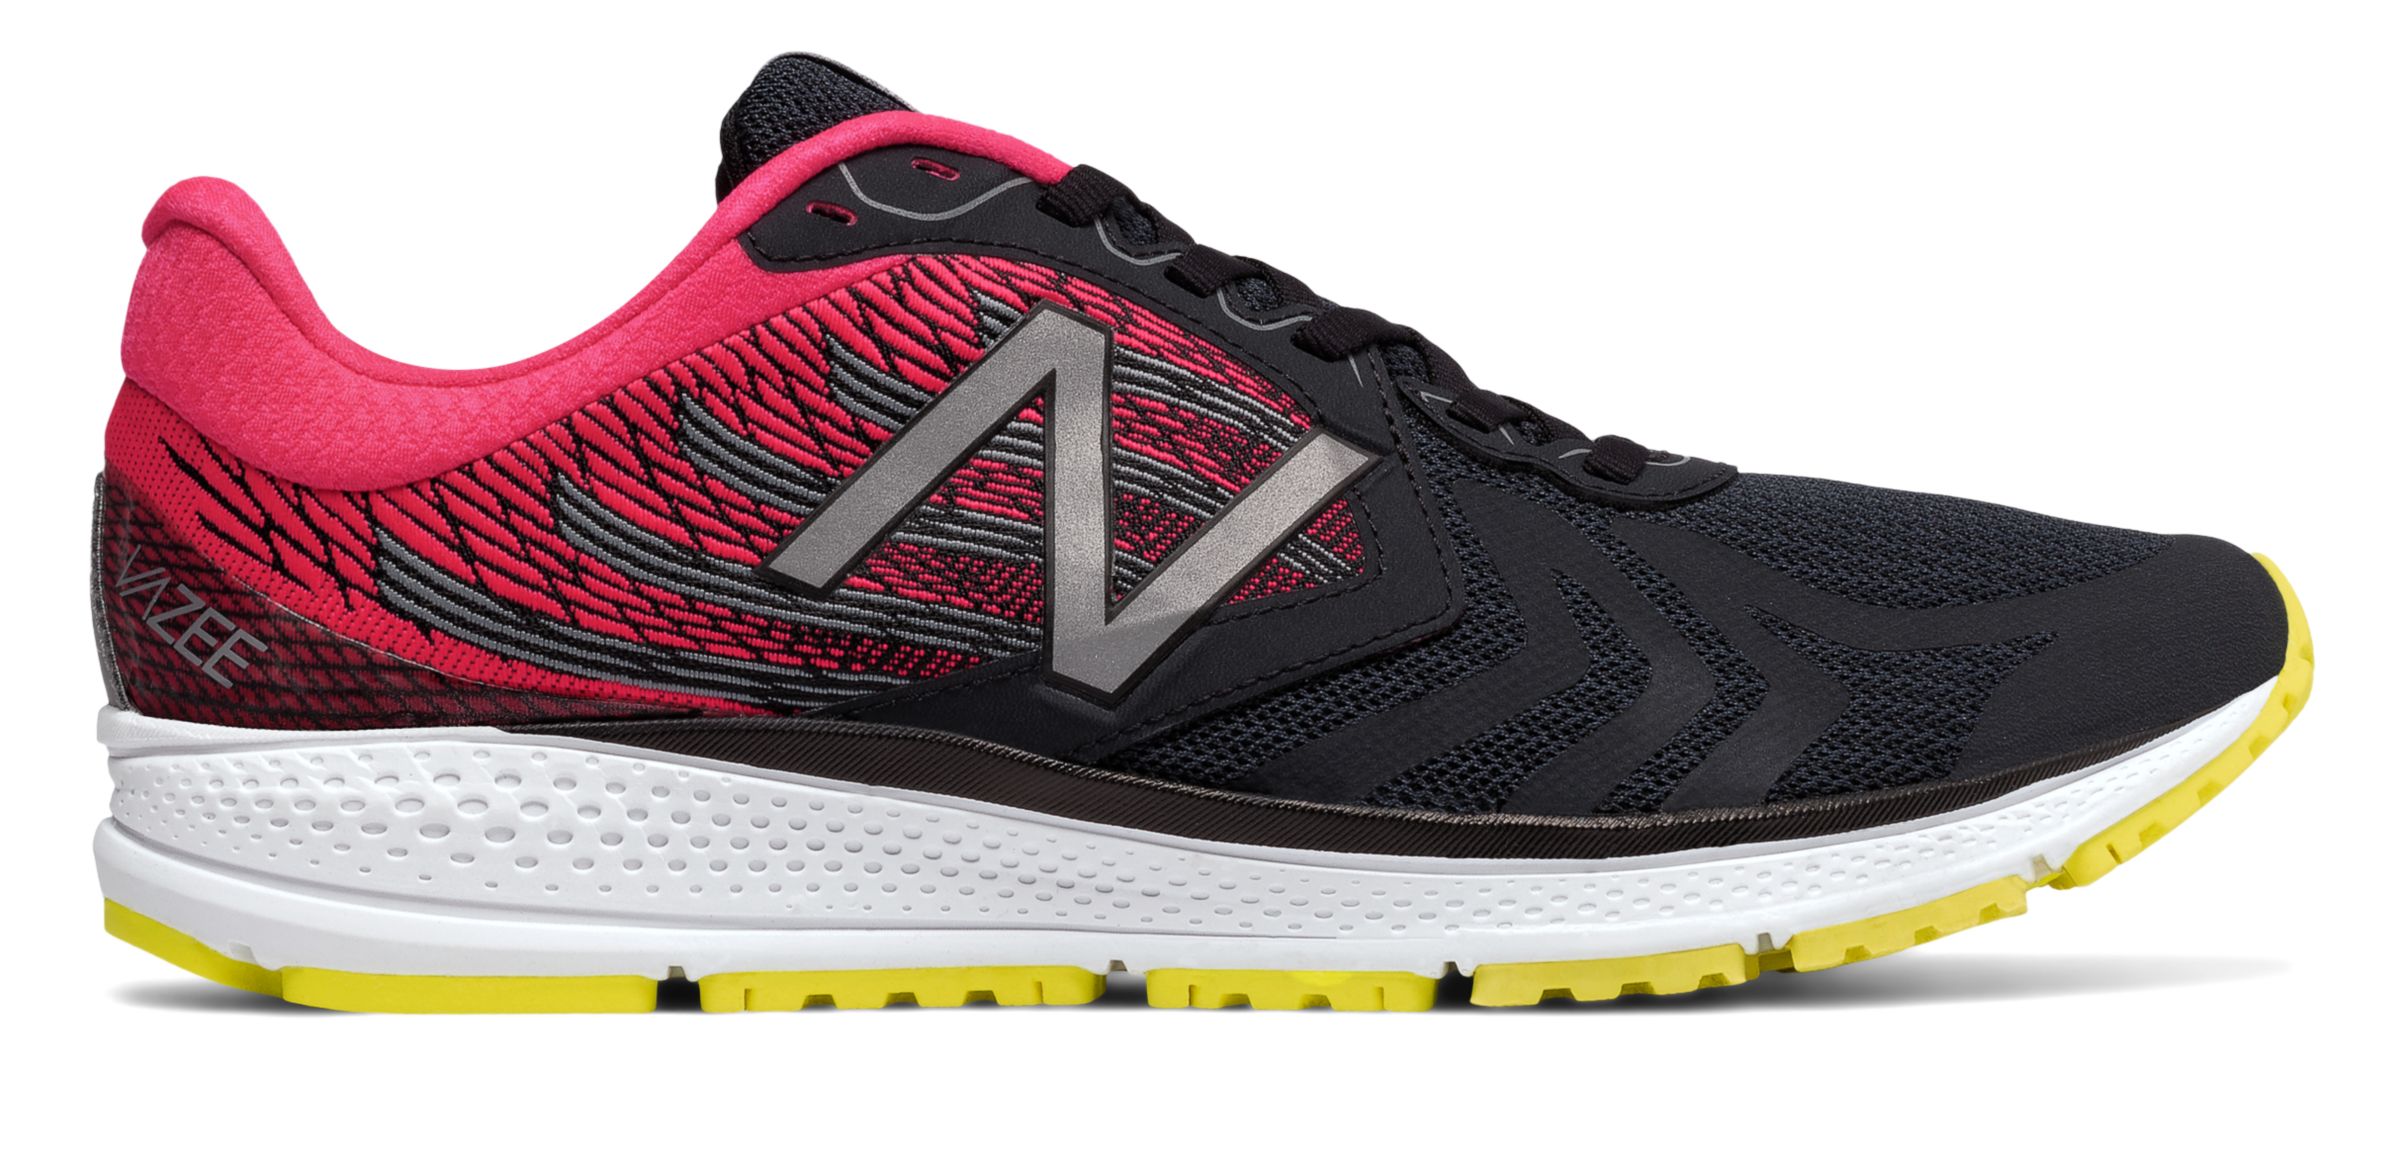 New Balance MPACE-V2 on Sale - Discounts Up to 54% Off on MPACEBR2 at Joe's New  Balance Outlet